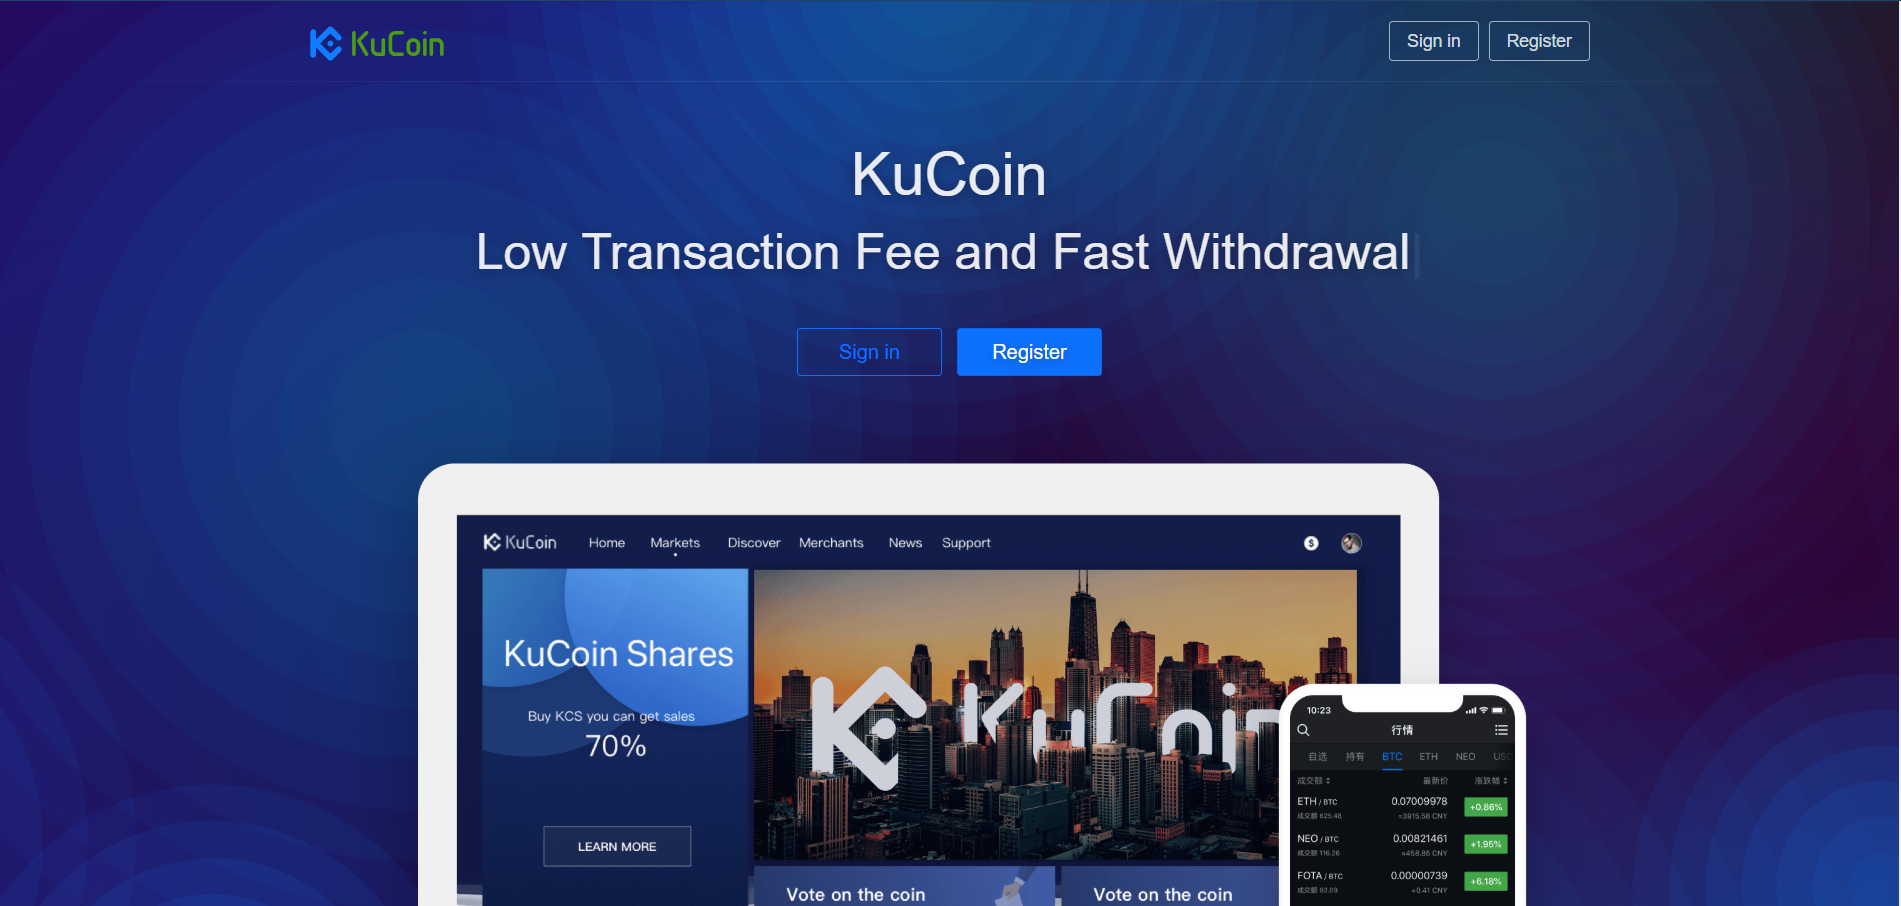 where is kucoin physically located